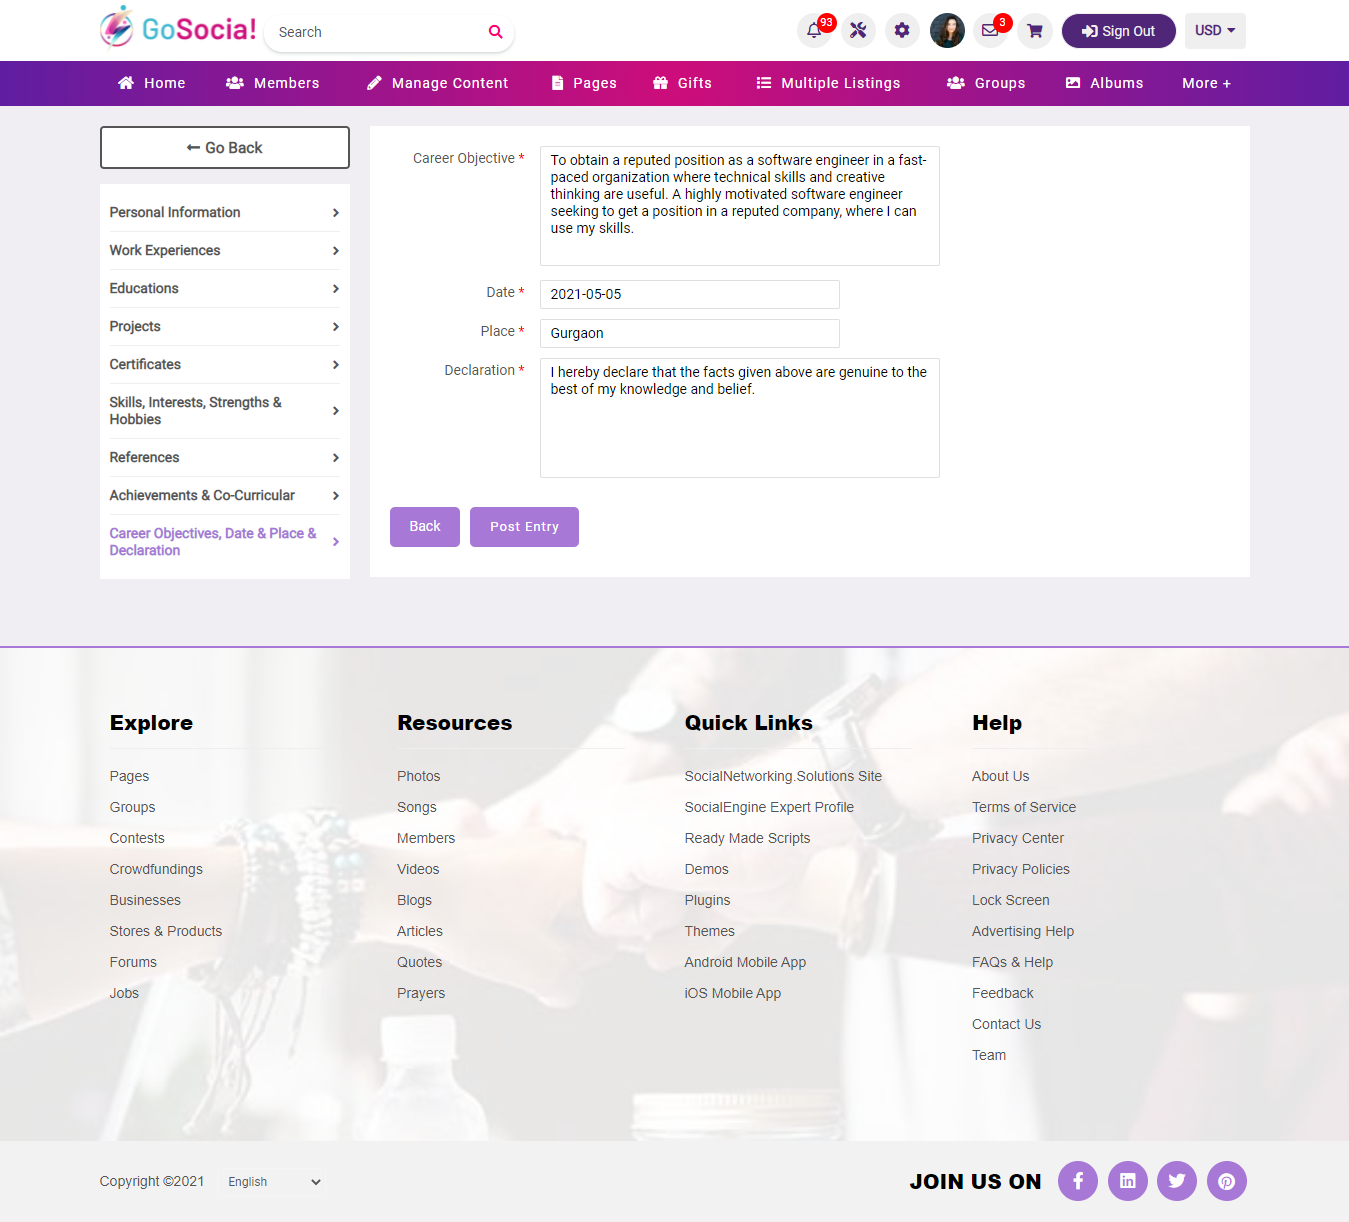 Add Career Objectives, Date & Place & Declaration Page